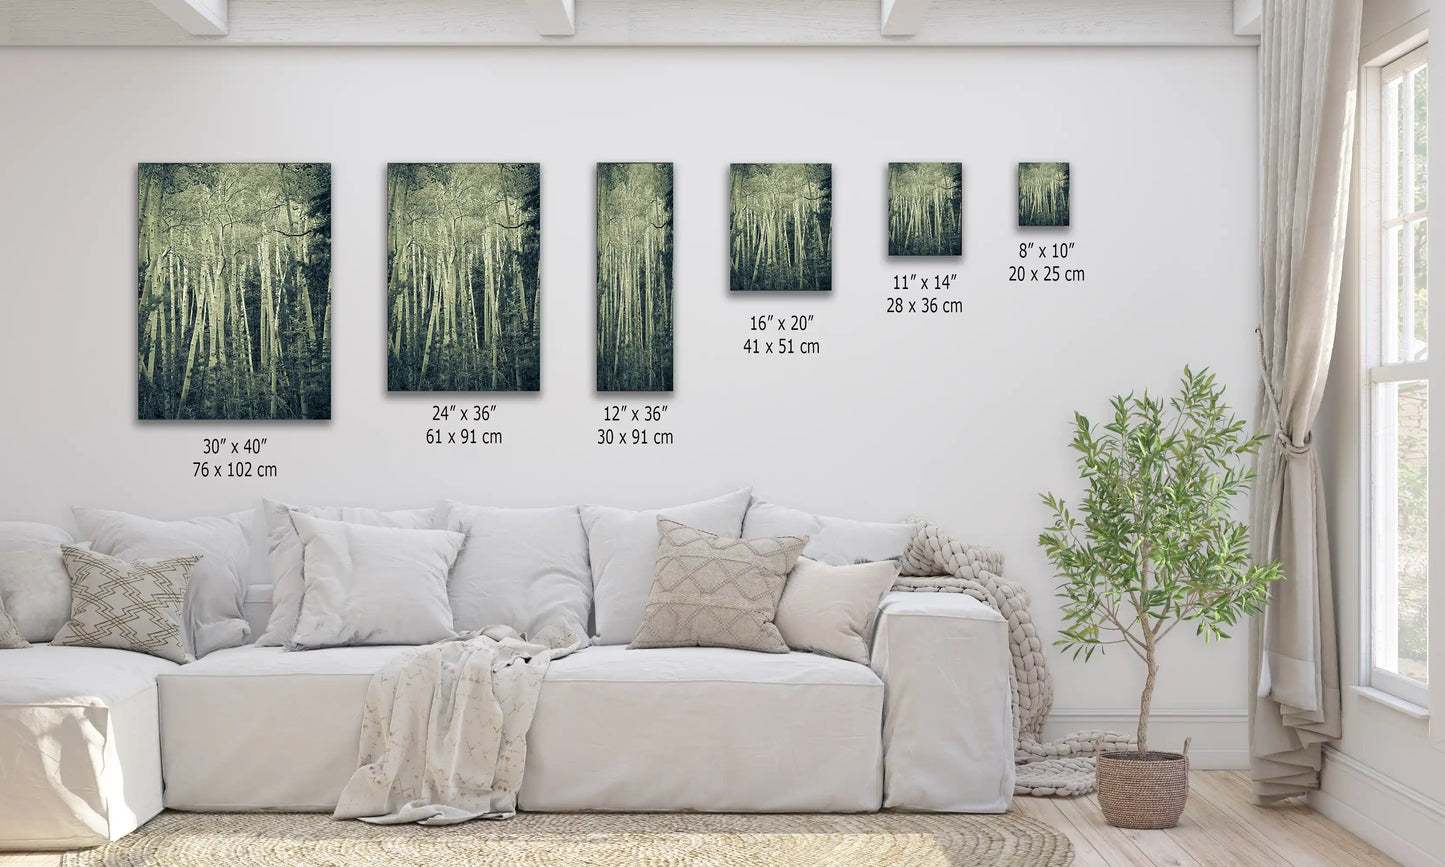 A display of various-sized canvas prints on a living room wall, all showcasing duotone images of aspen birch trees in a mysterious forest setting.